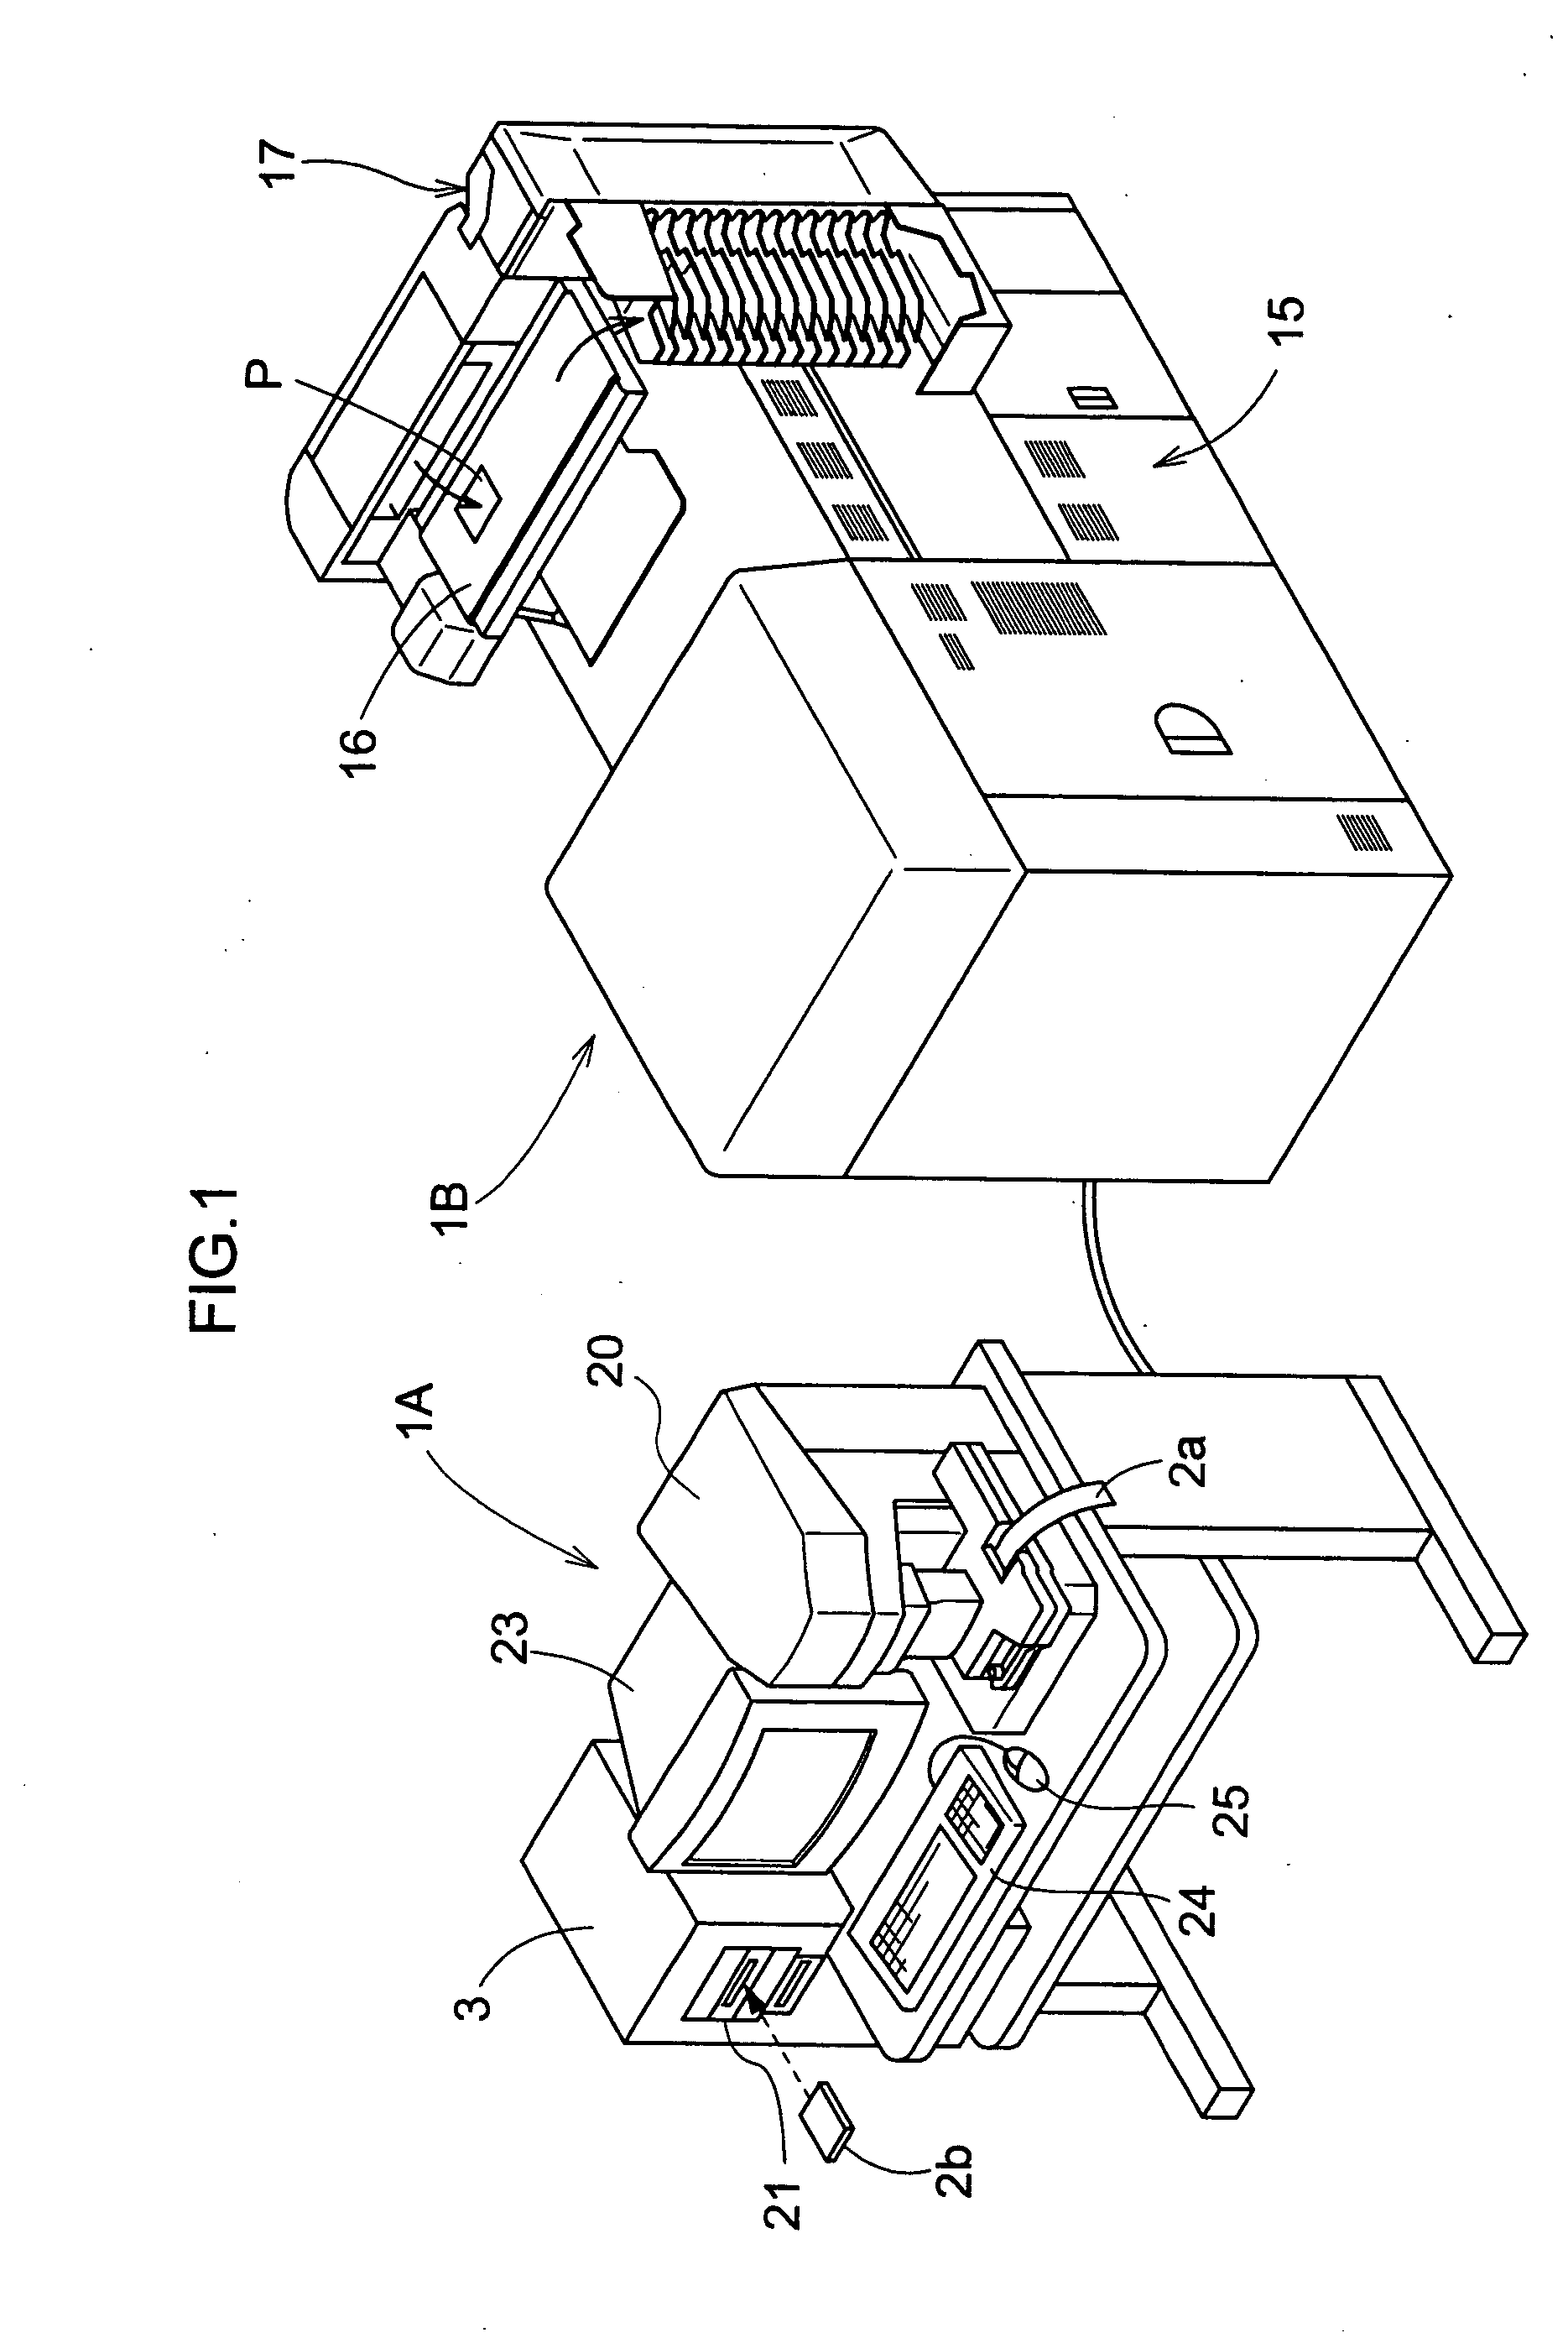 Image processing method for resizing image and image processing apparatus for implementing the method